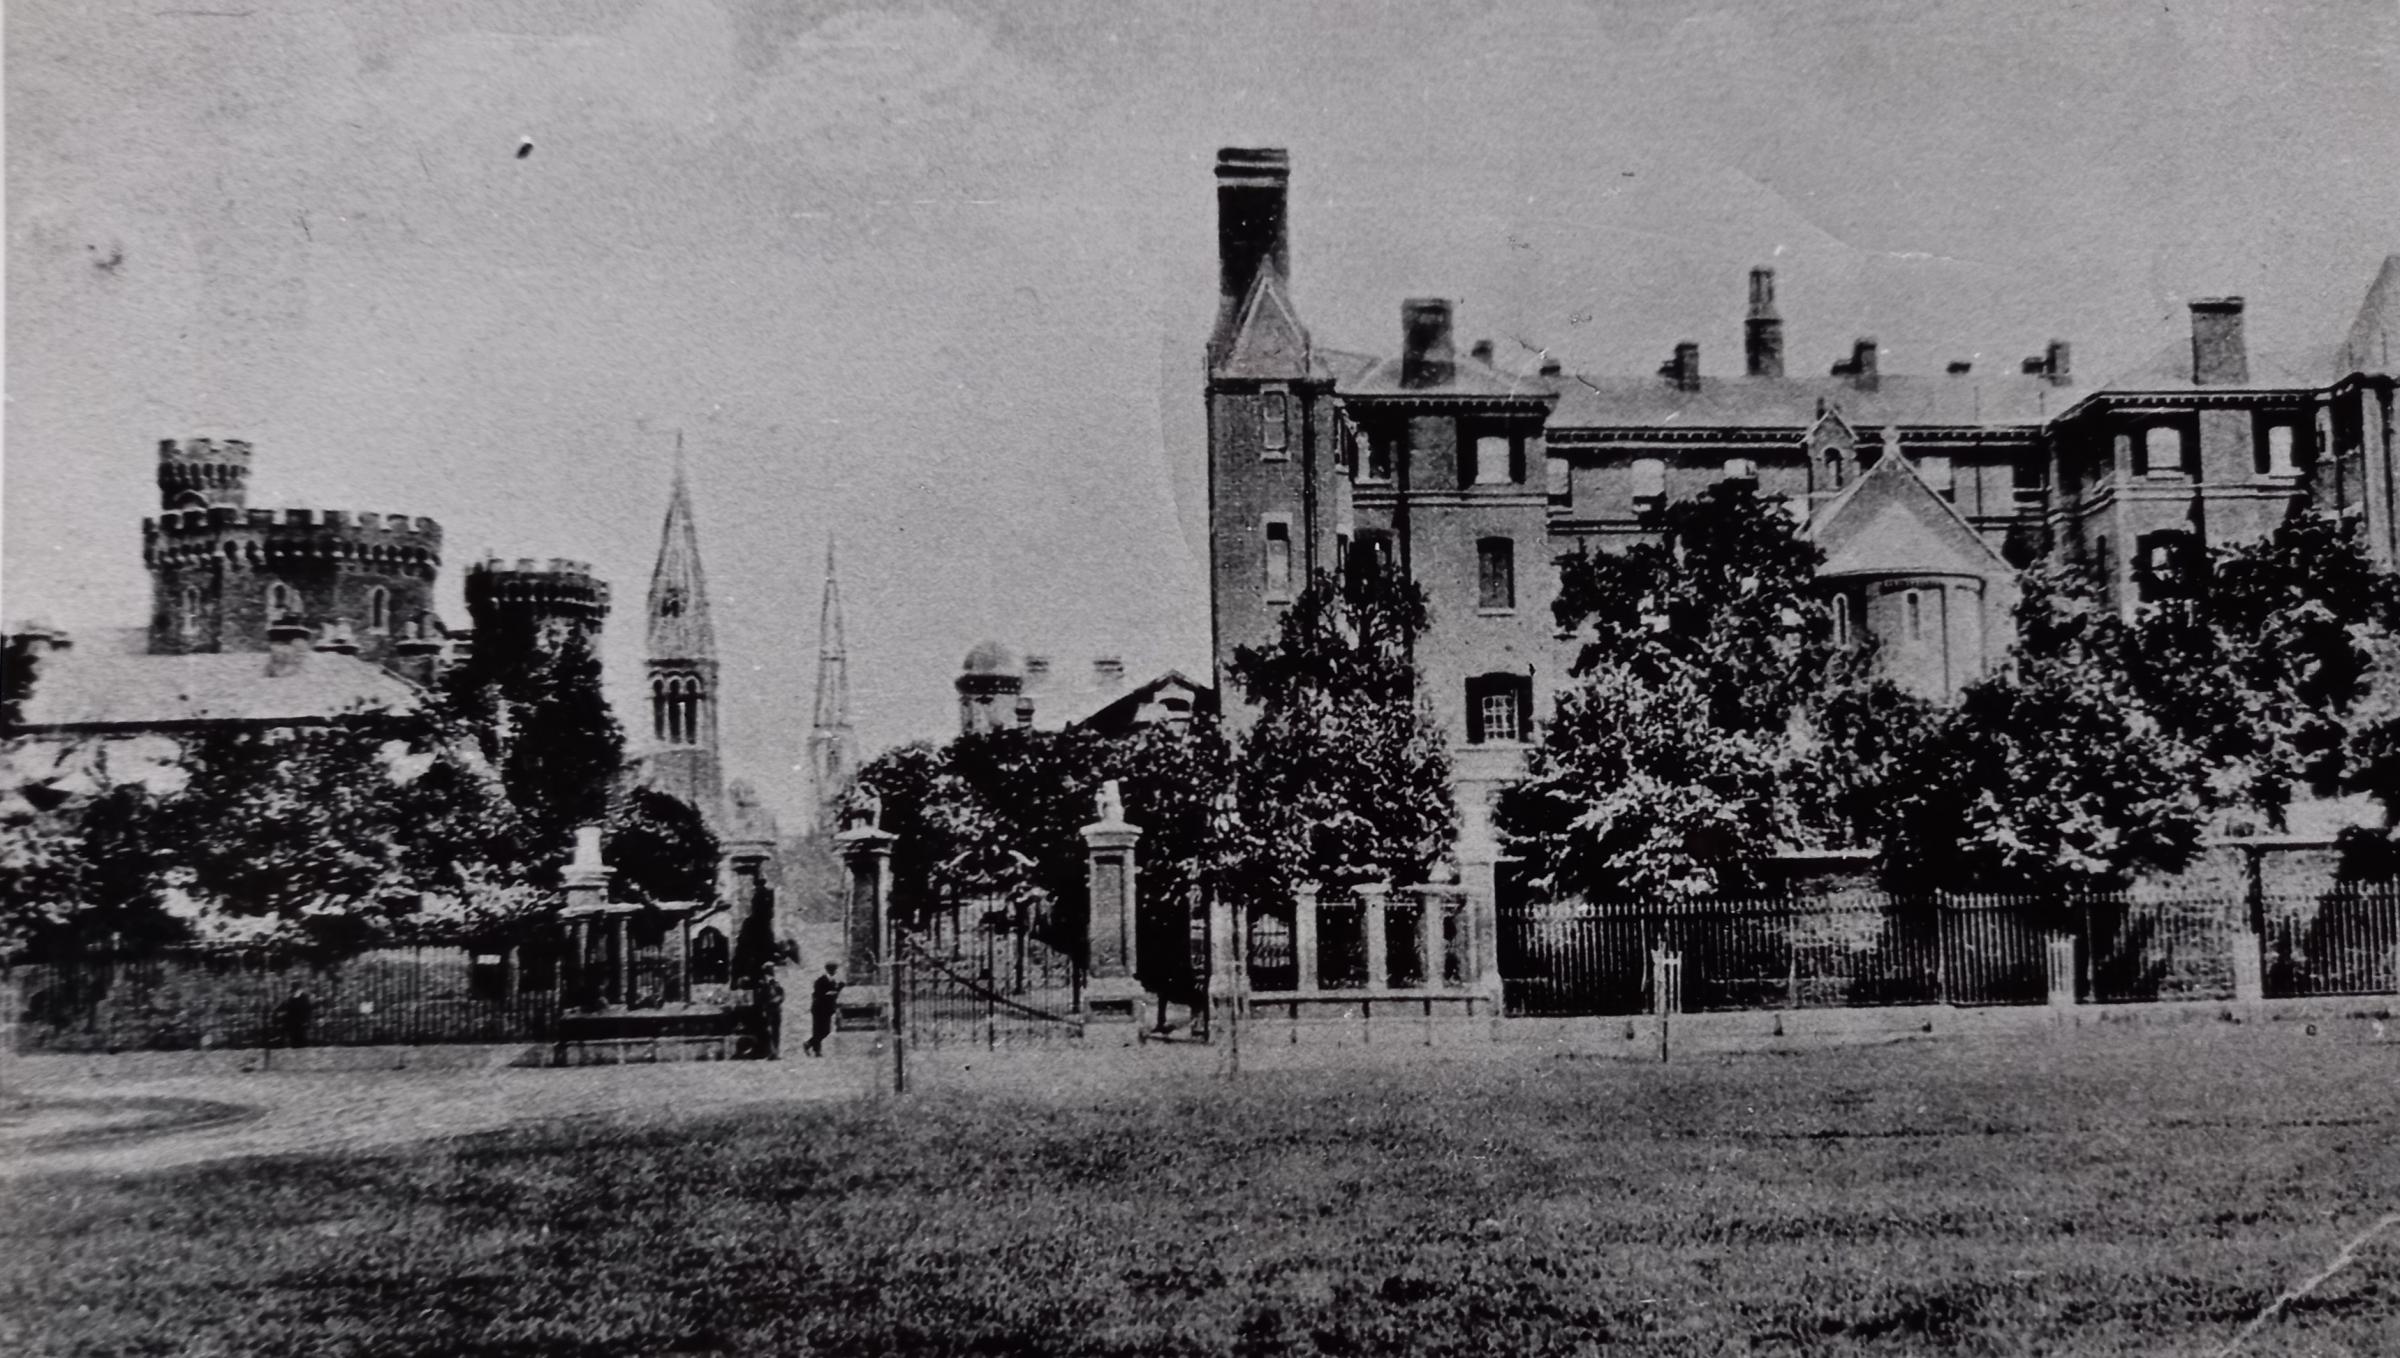 Taken from Pitchcroft in 1920, this image shows the Royal Infirmary, while opposite across Castle Street is the castellated old prison, which was to close two years later